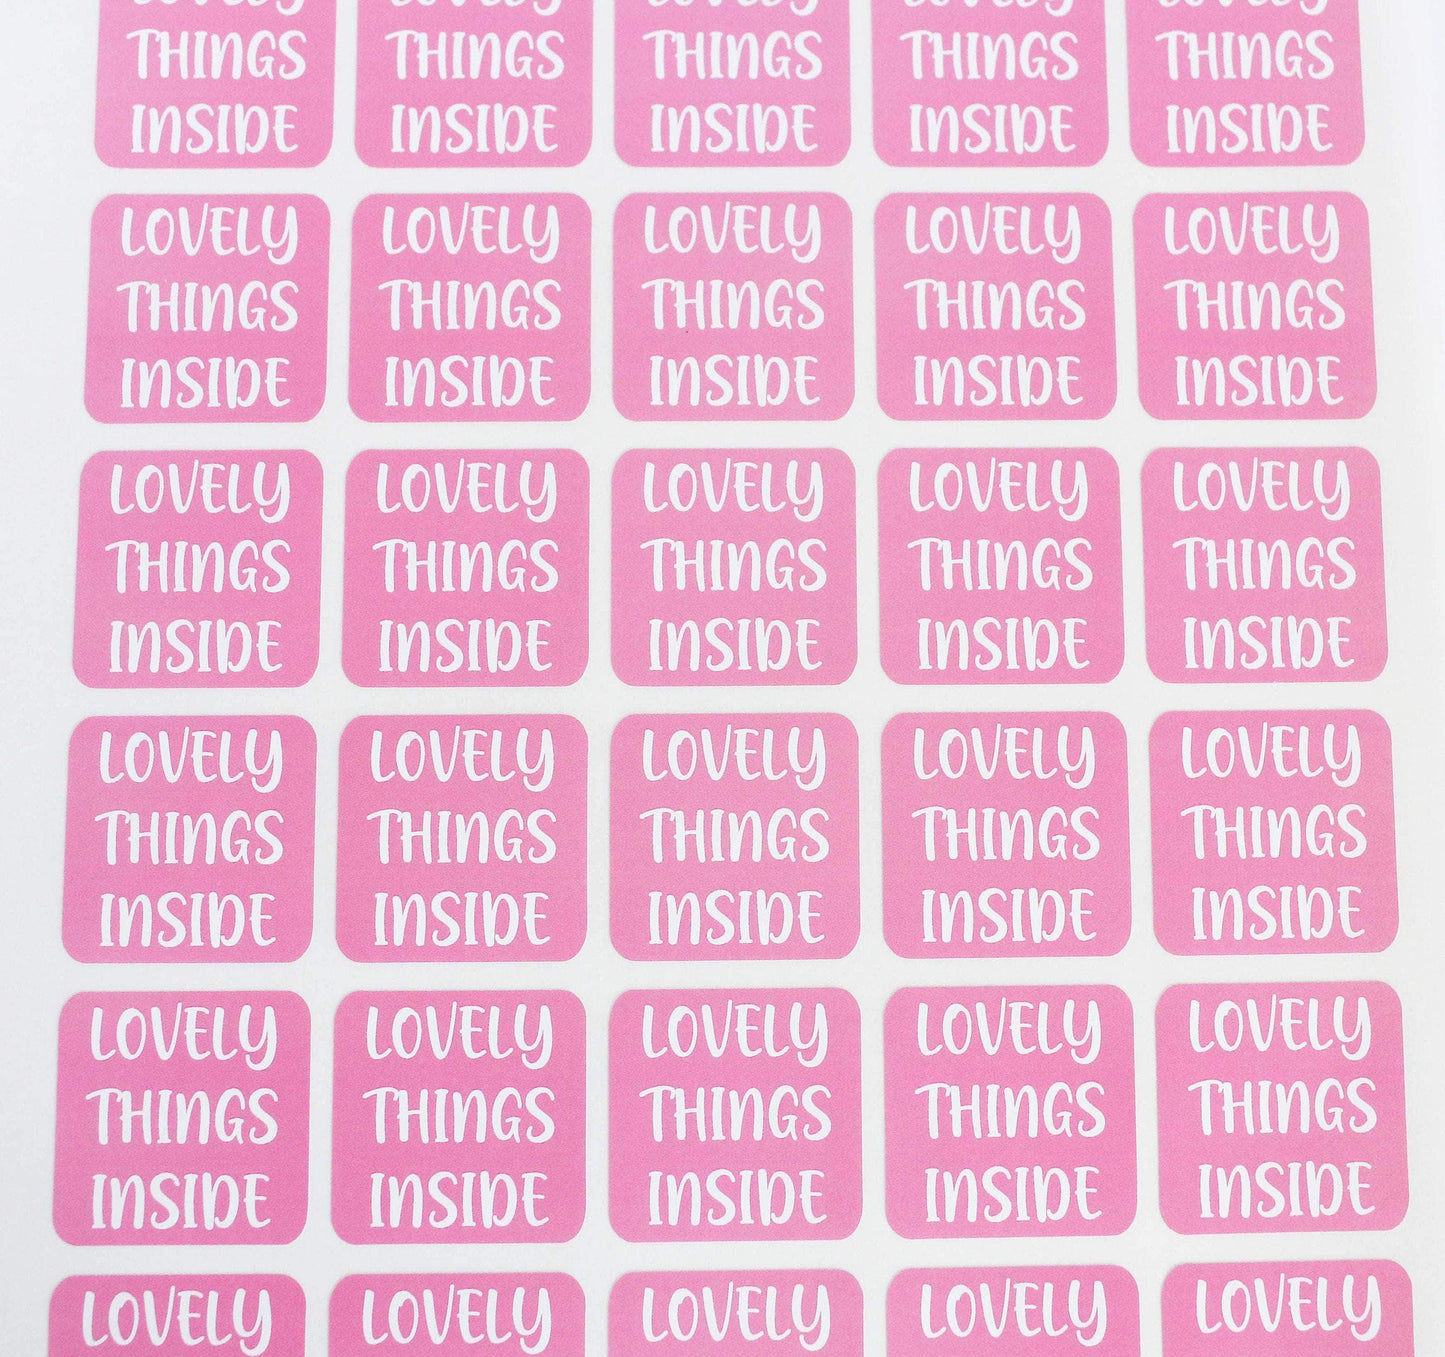 E&L Designs Lovely Things Inside Order Stickers - Pack of 30